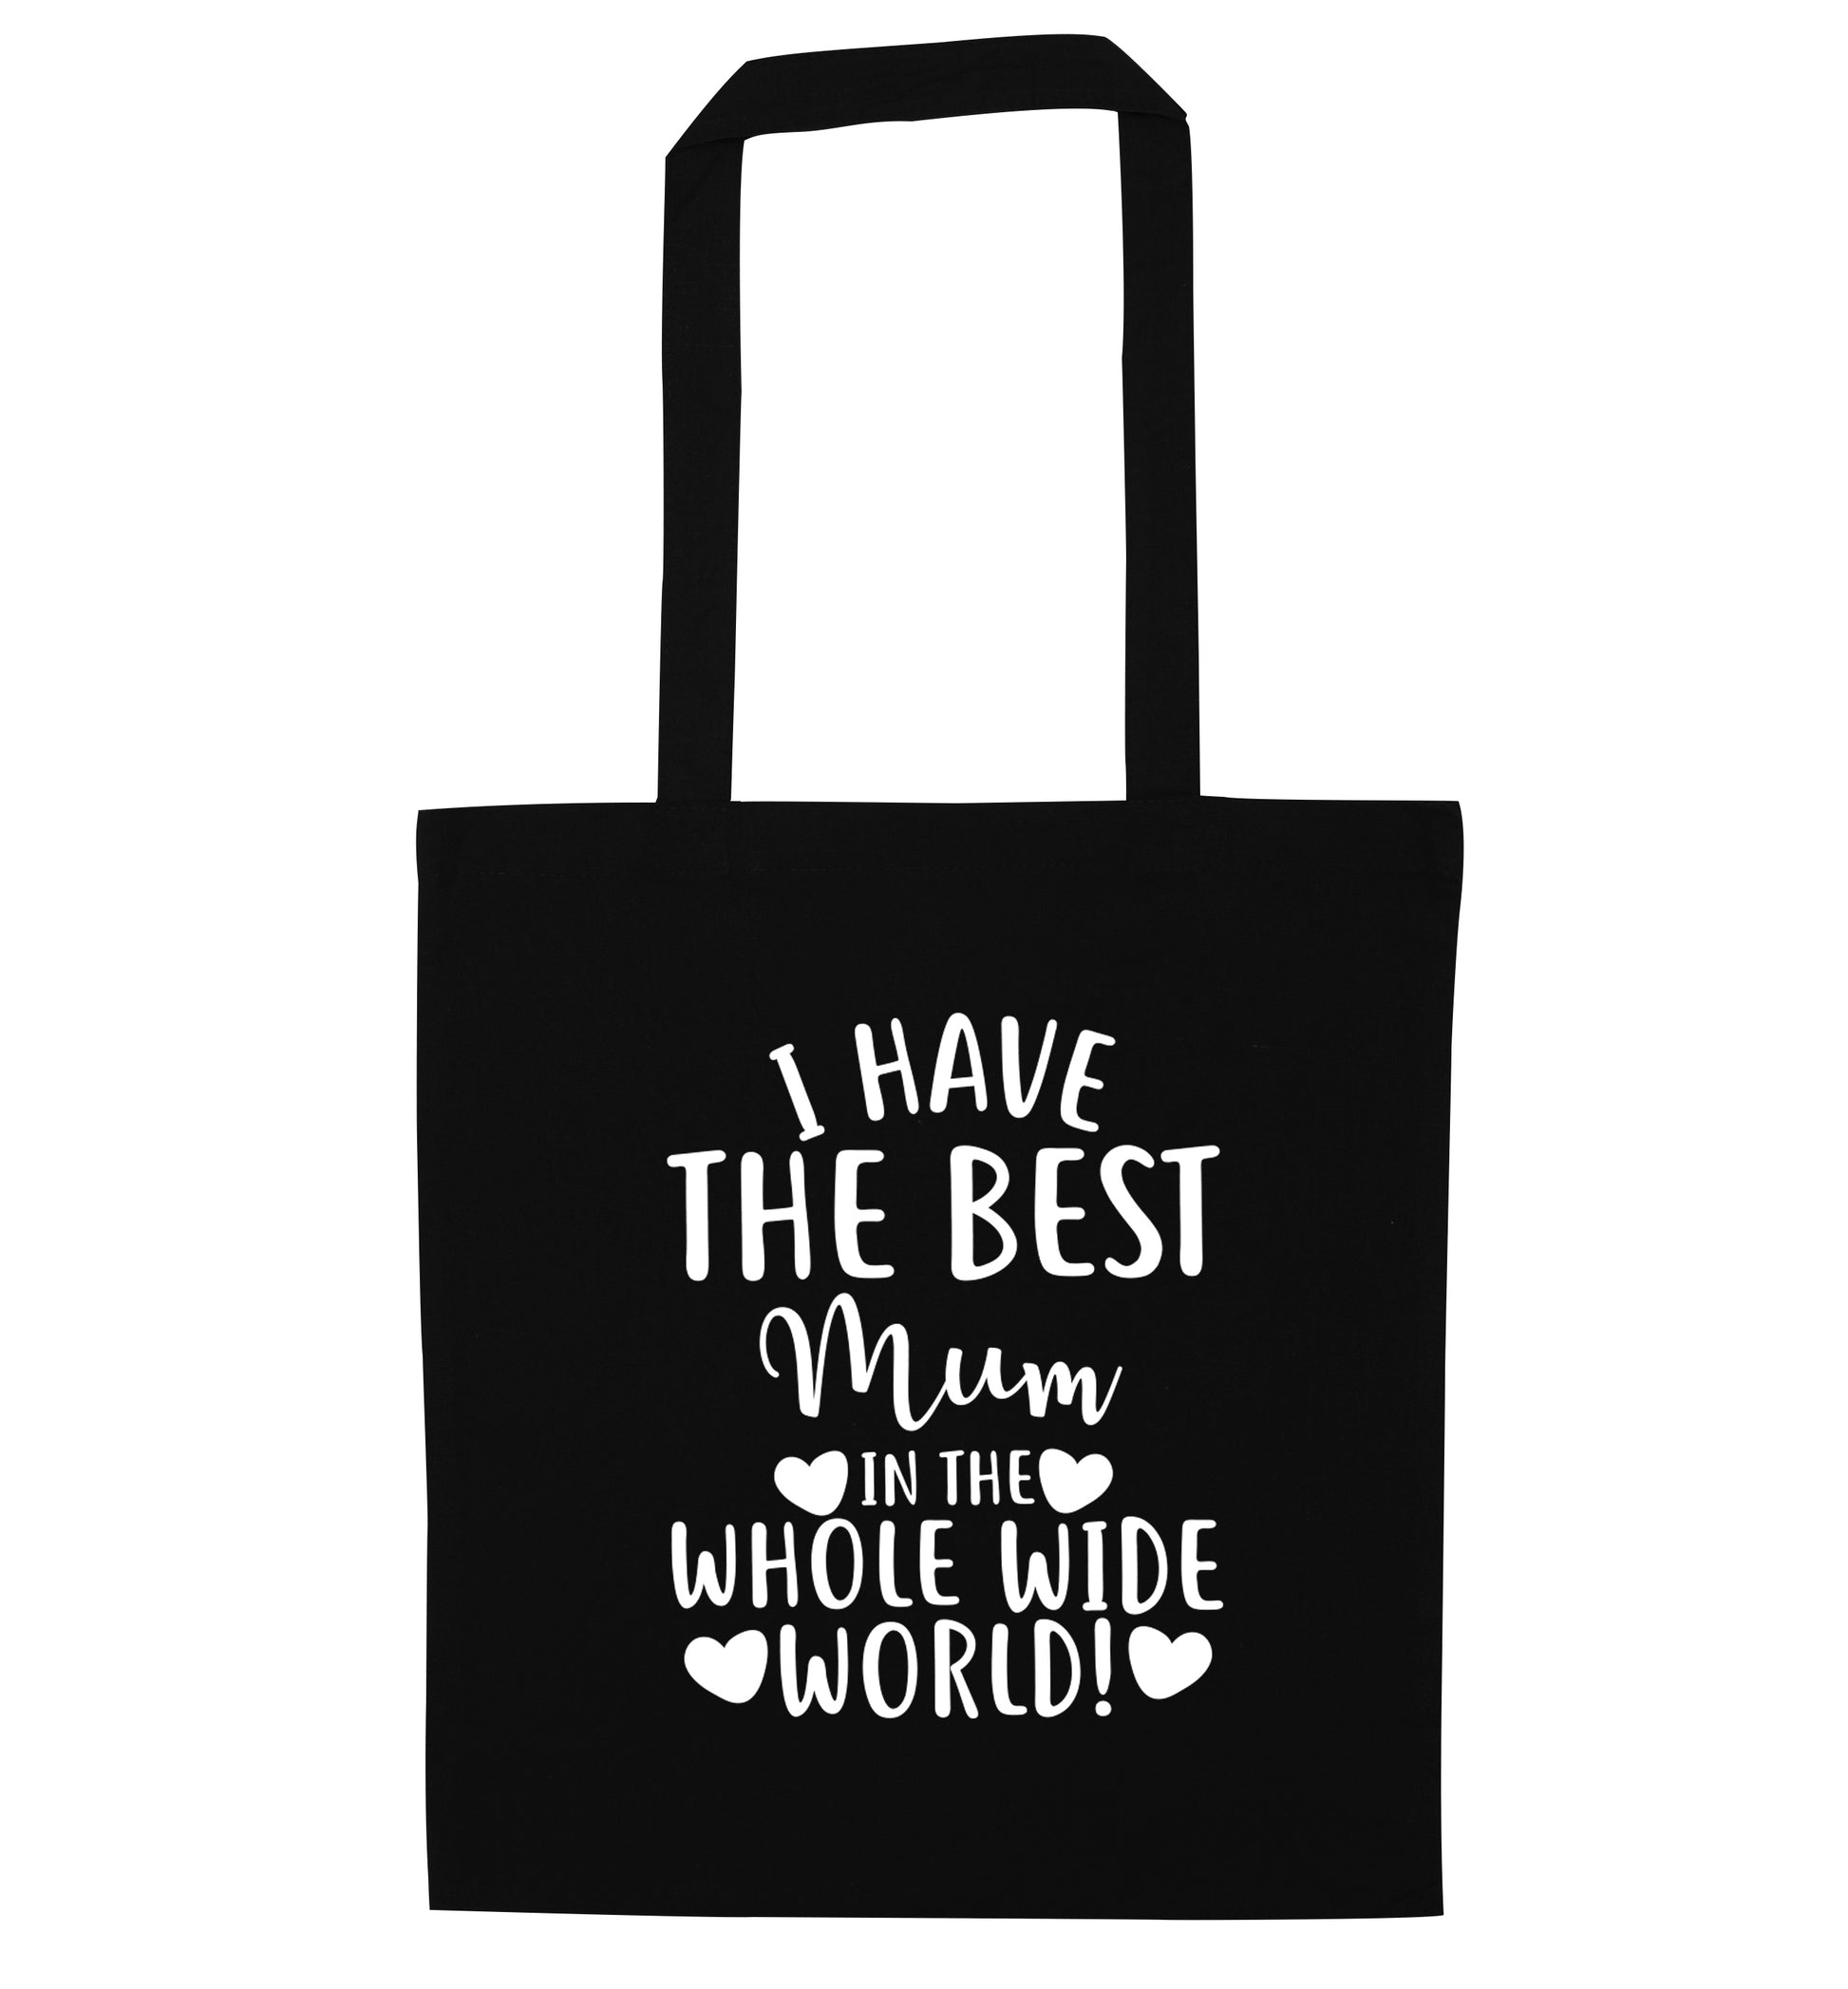 I have the best mum in the whole wide world! black tote bag